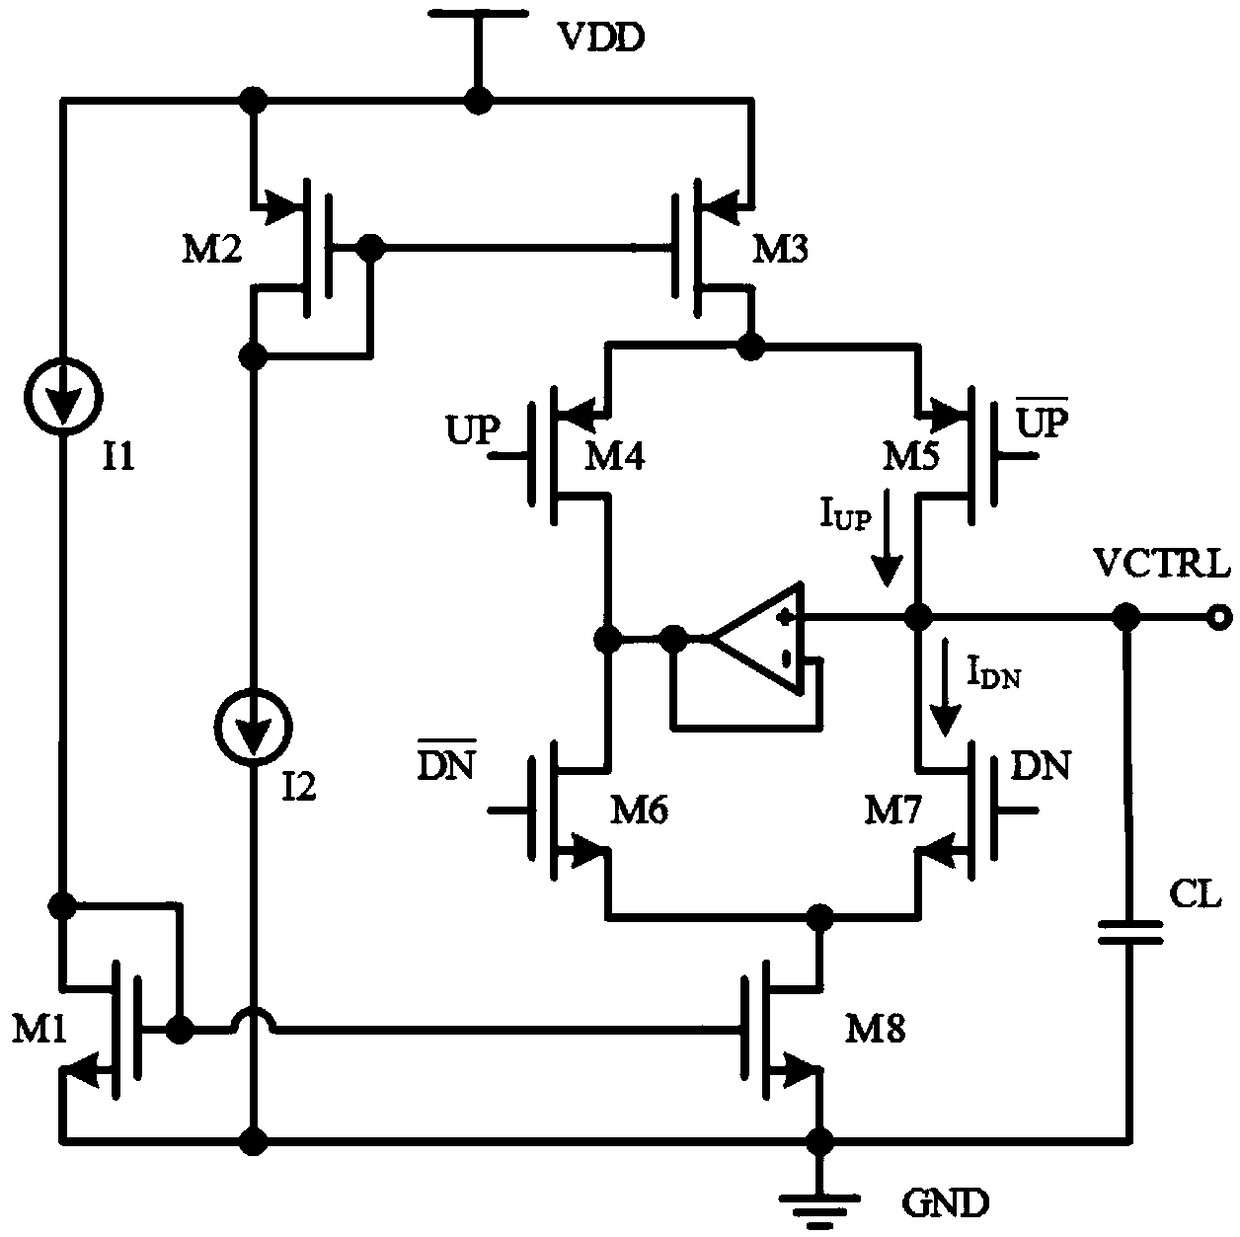 Charge pump circuit with low miss ratio for delay phase-locked loop